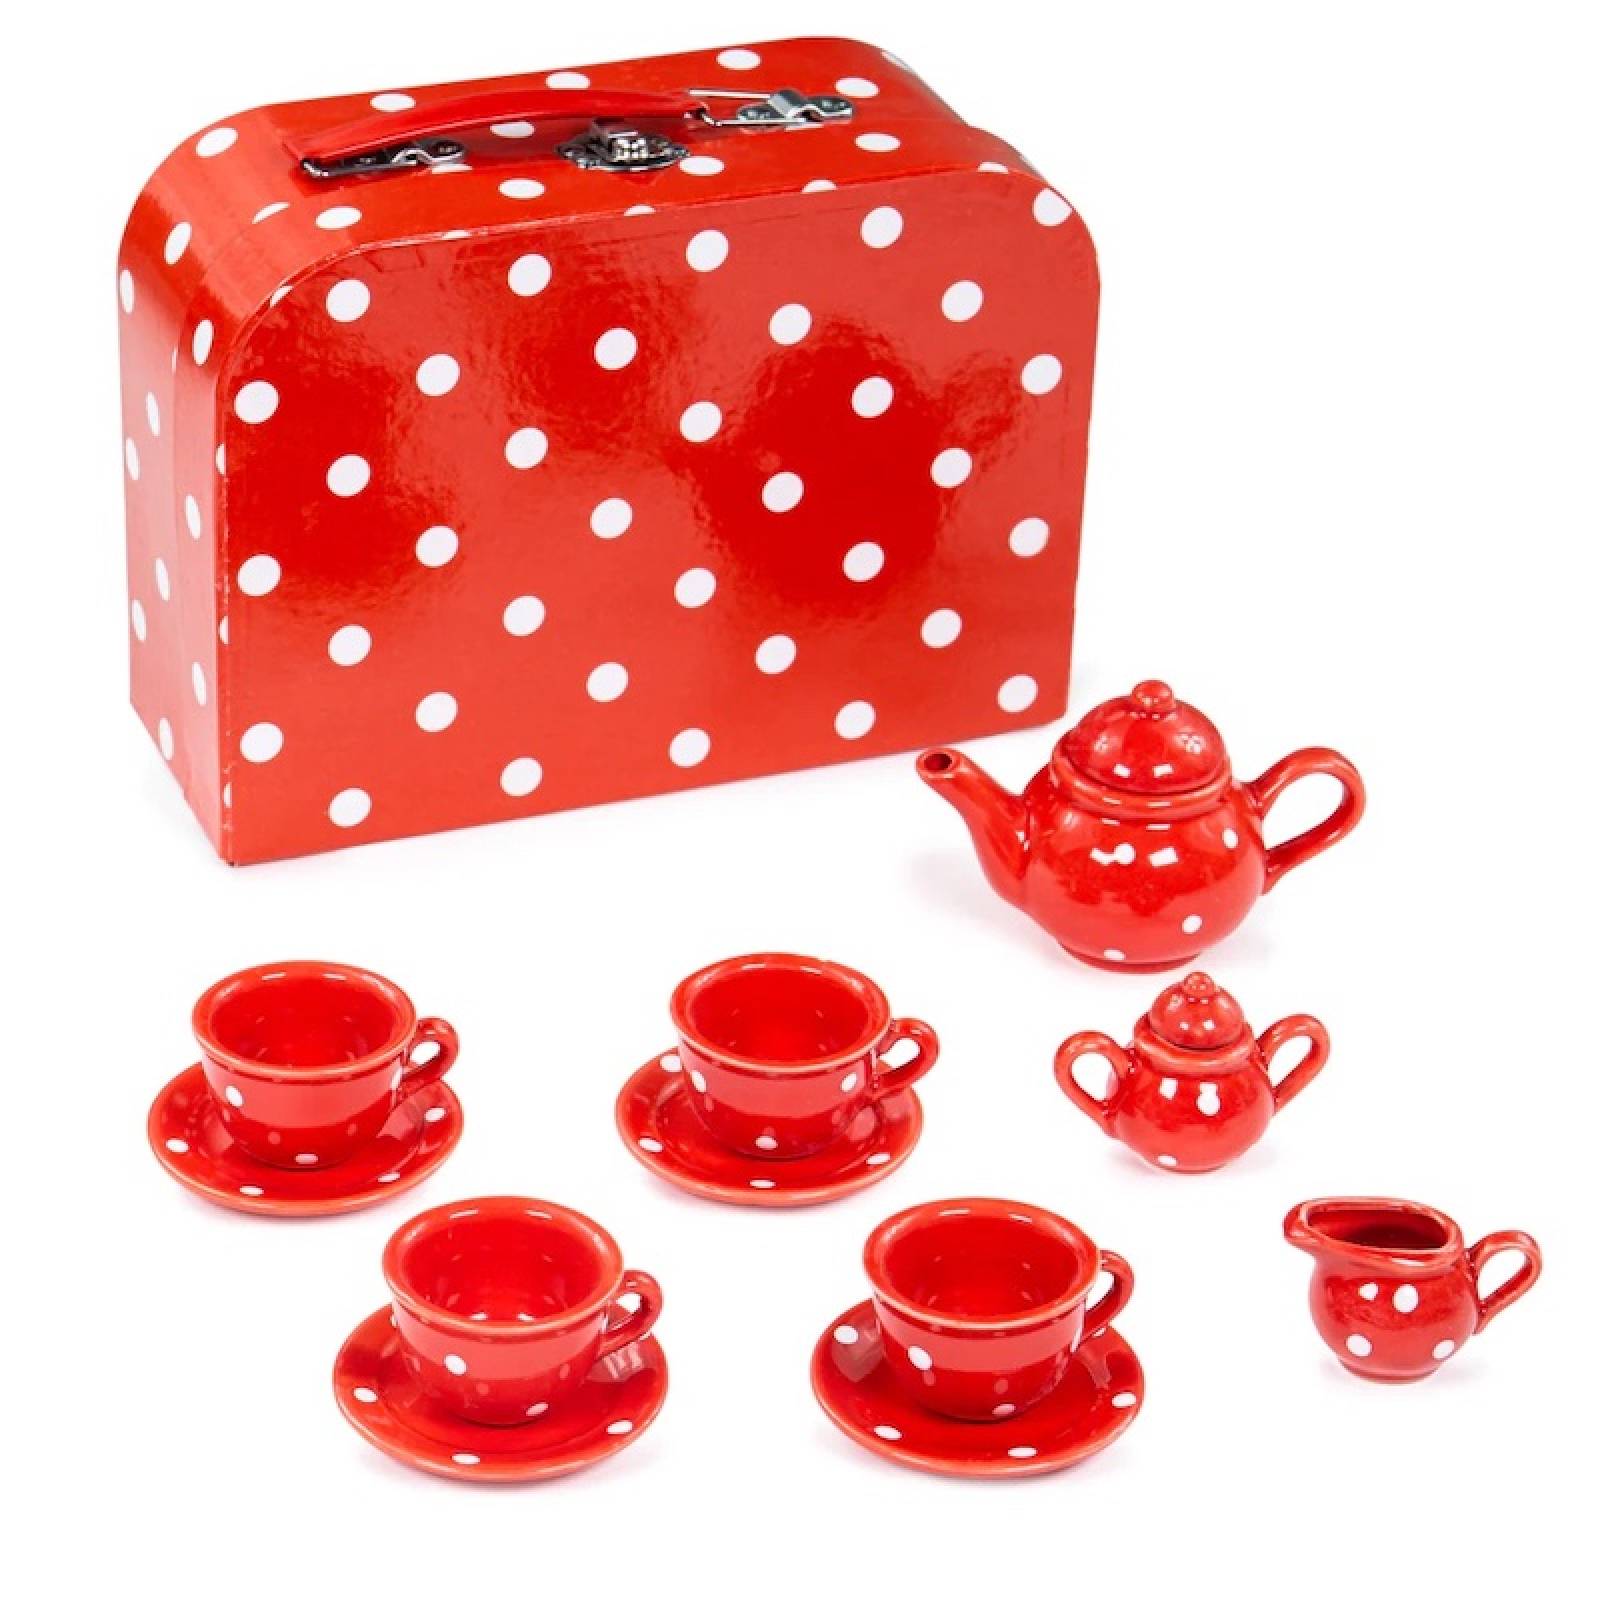 Red And White Spot Porcelain Tea Set In Case 3+ thumbnails